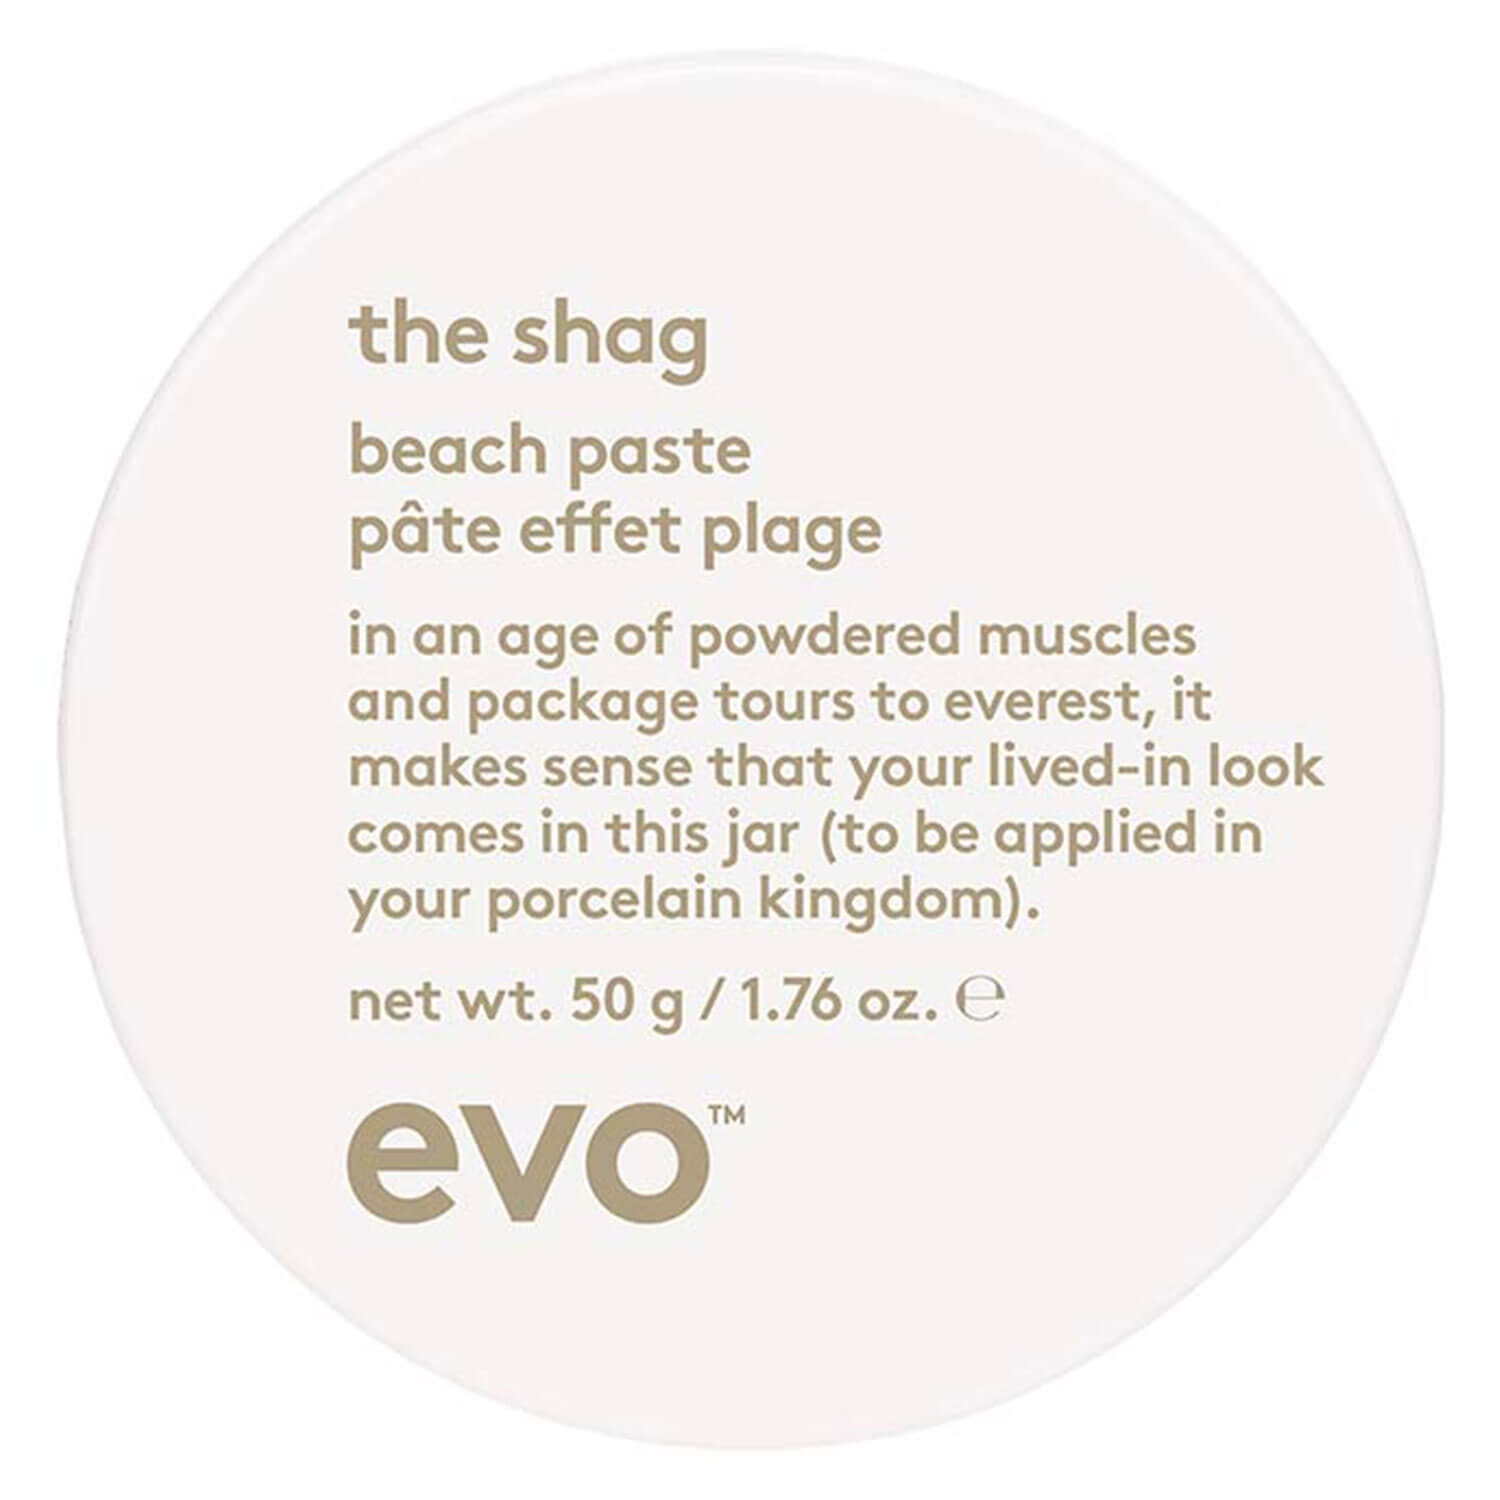 Product image from evo style - the shag beach paste